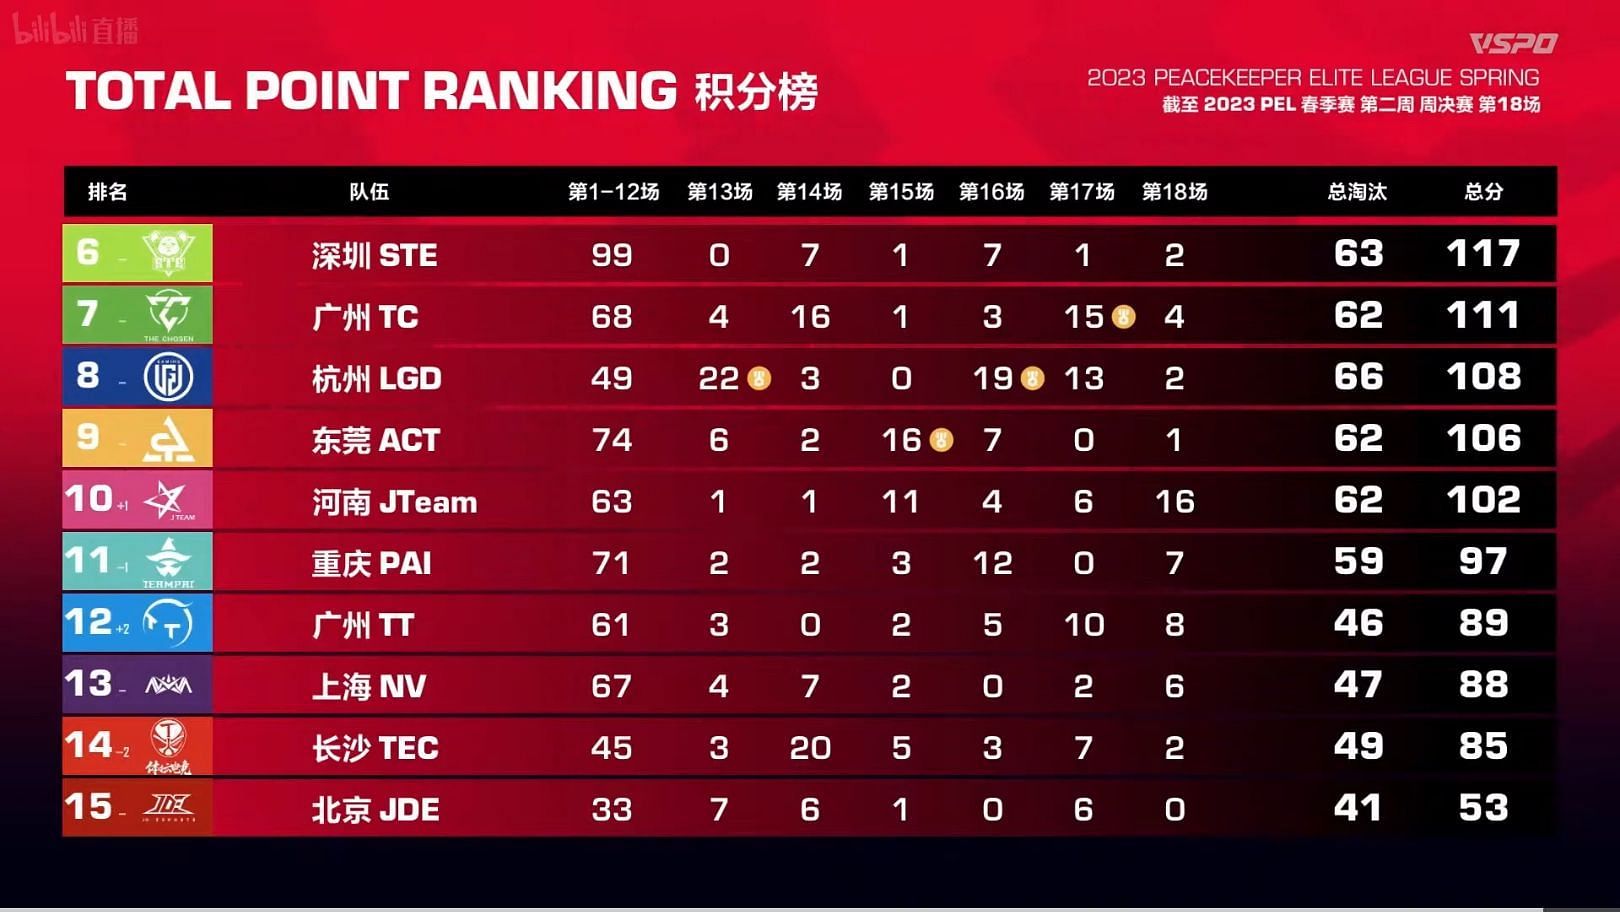 Nova Esports The claimed 13th place in PEL Week 2 (Image via Tencent)